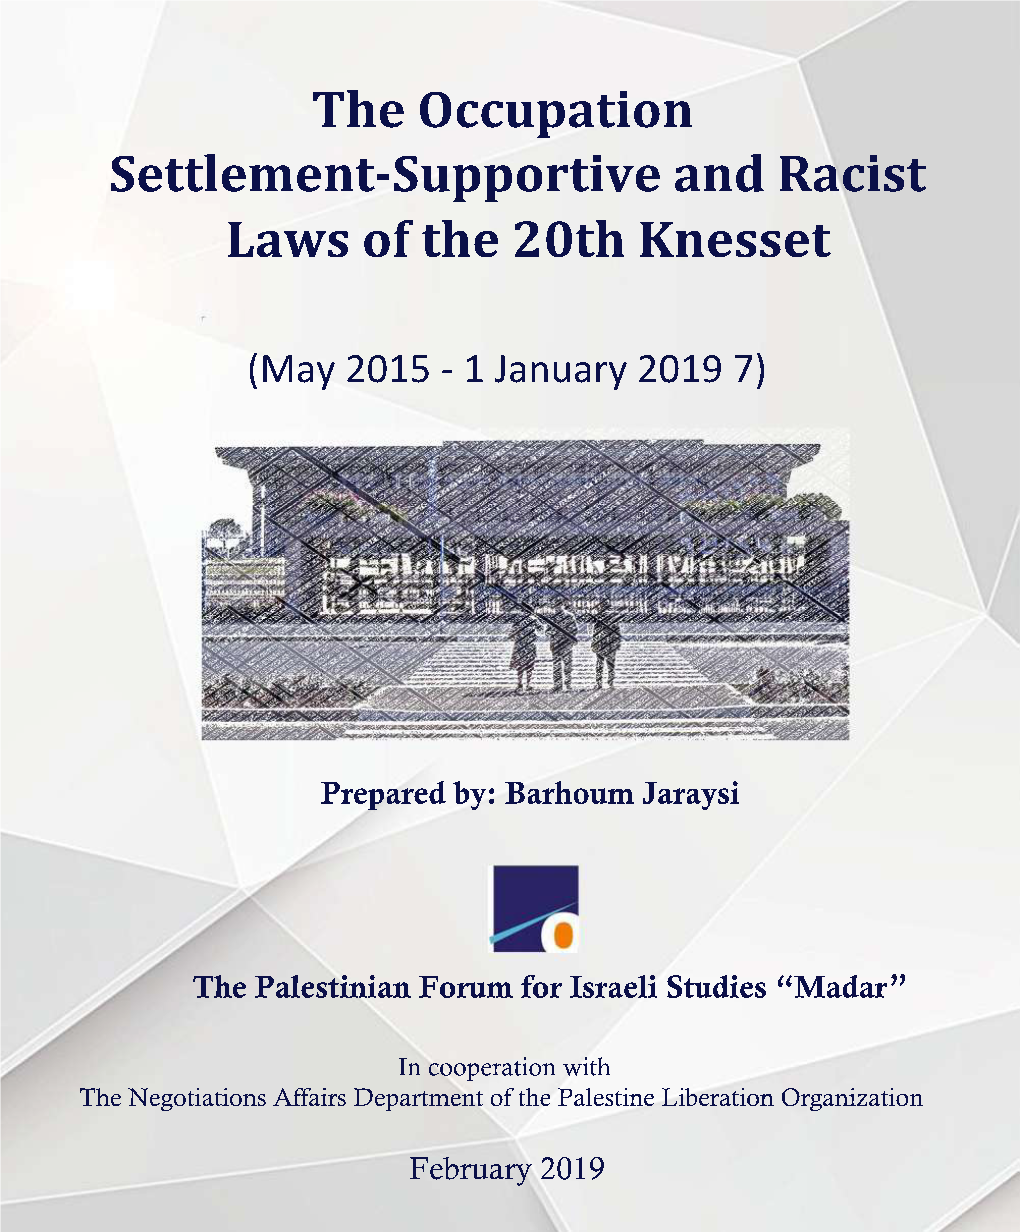 The Occupation, Settlement-Supportive and Racist